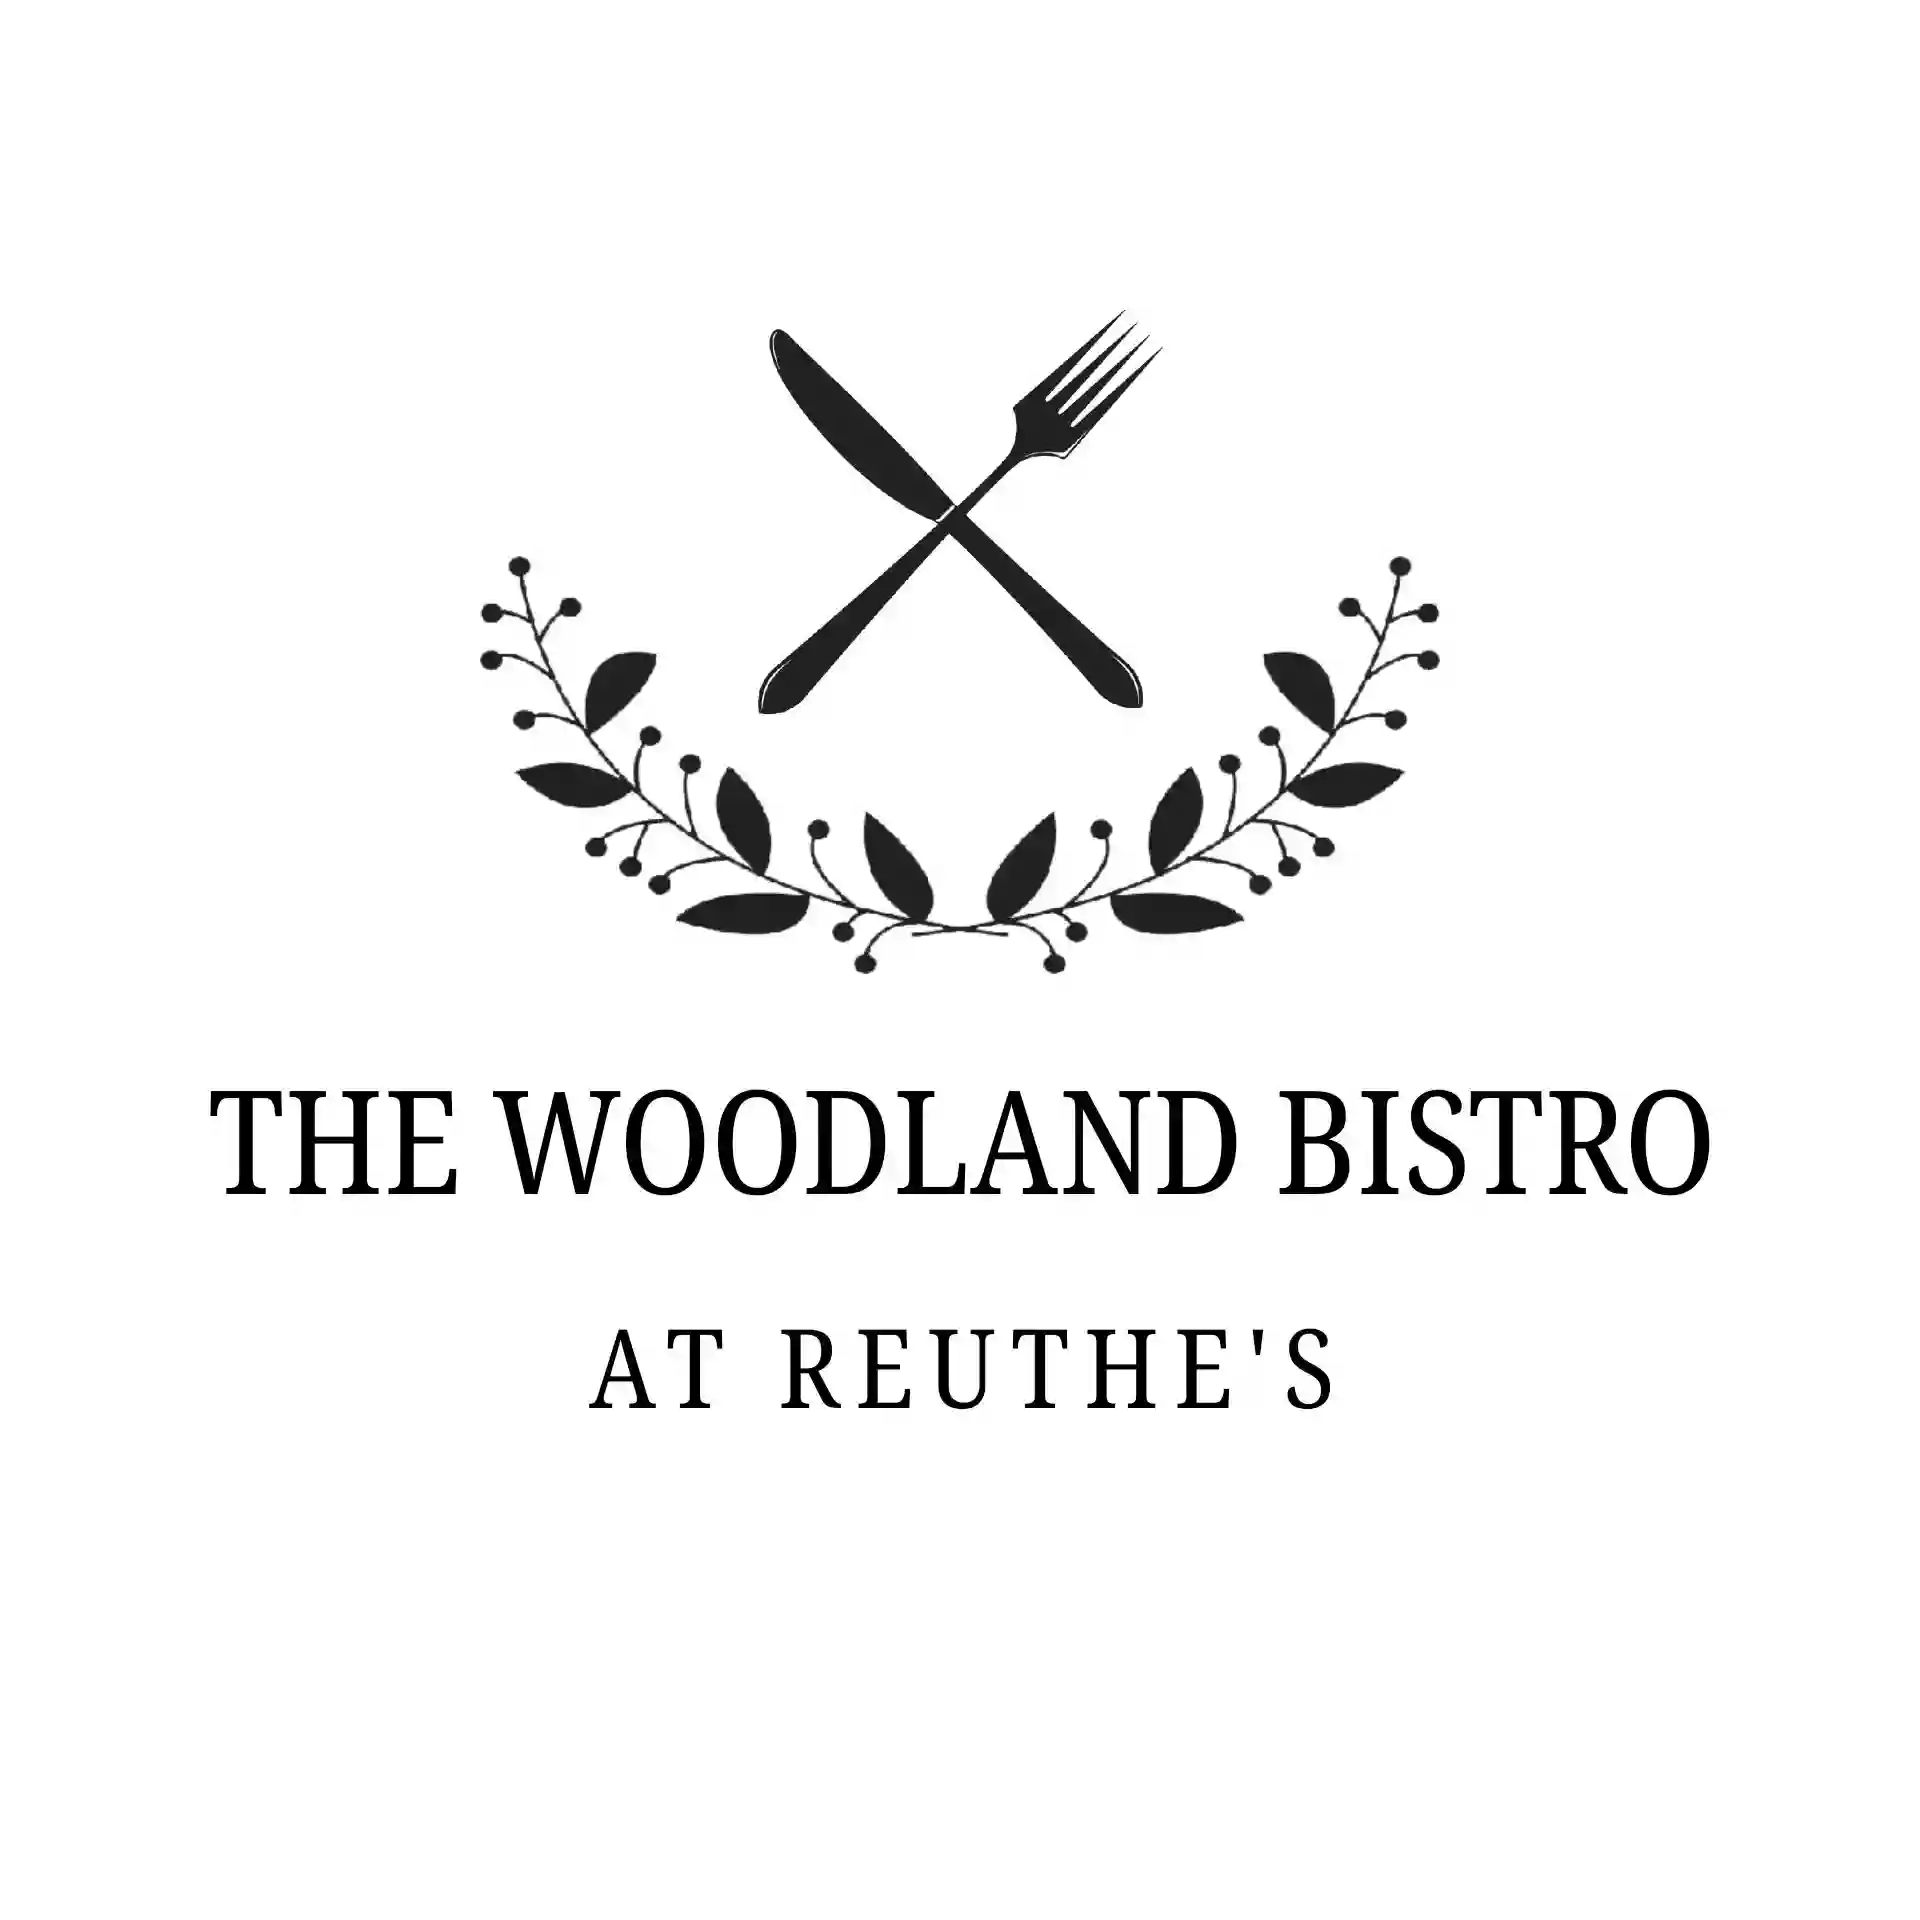 The Woodland Bistro at Reuthe's